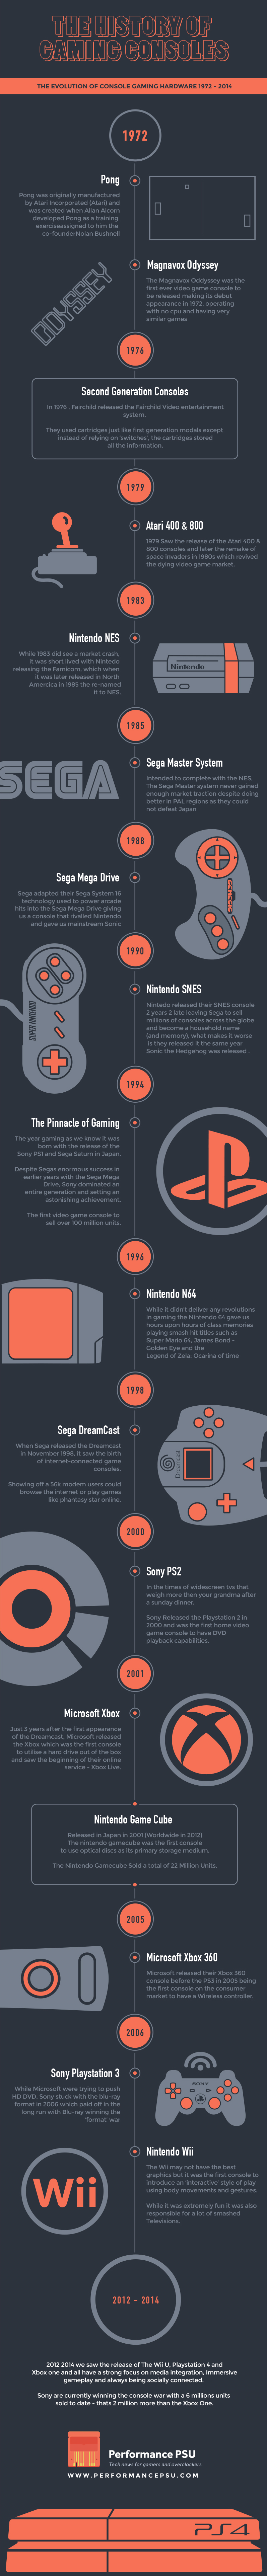 The History of Gaming Consoles Infographic